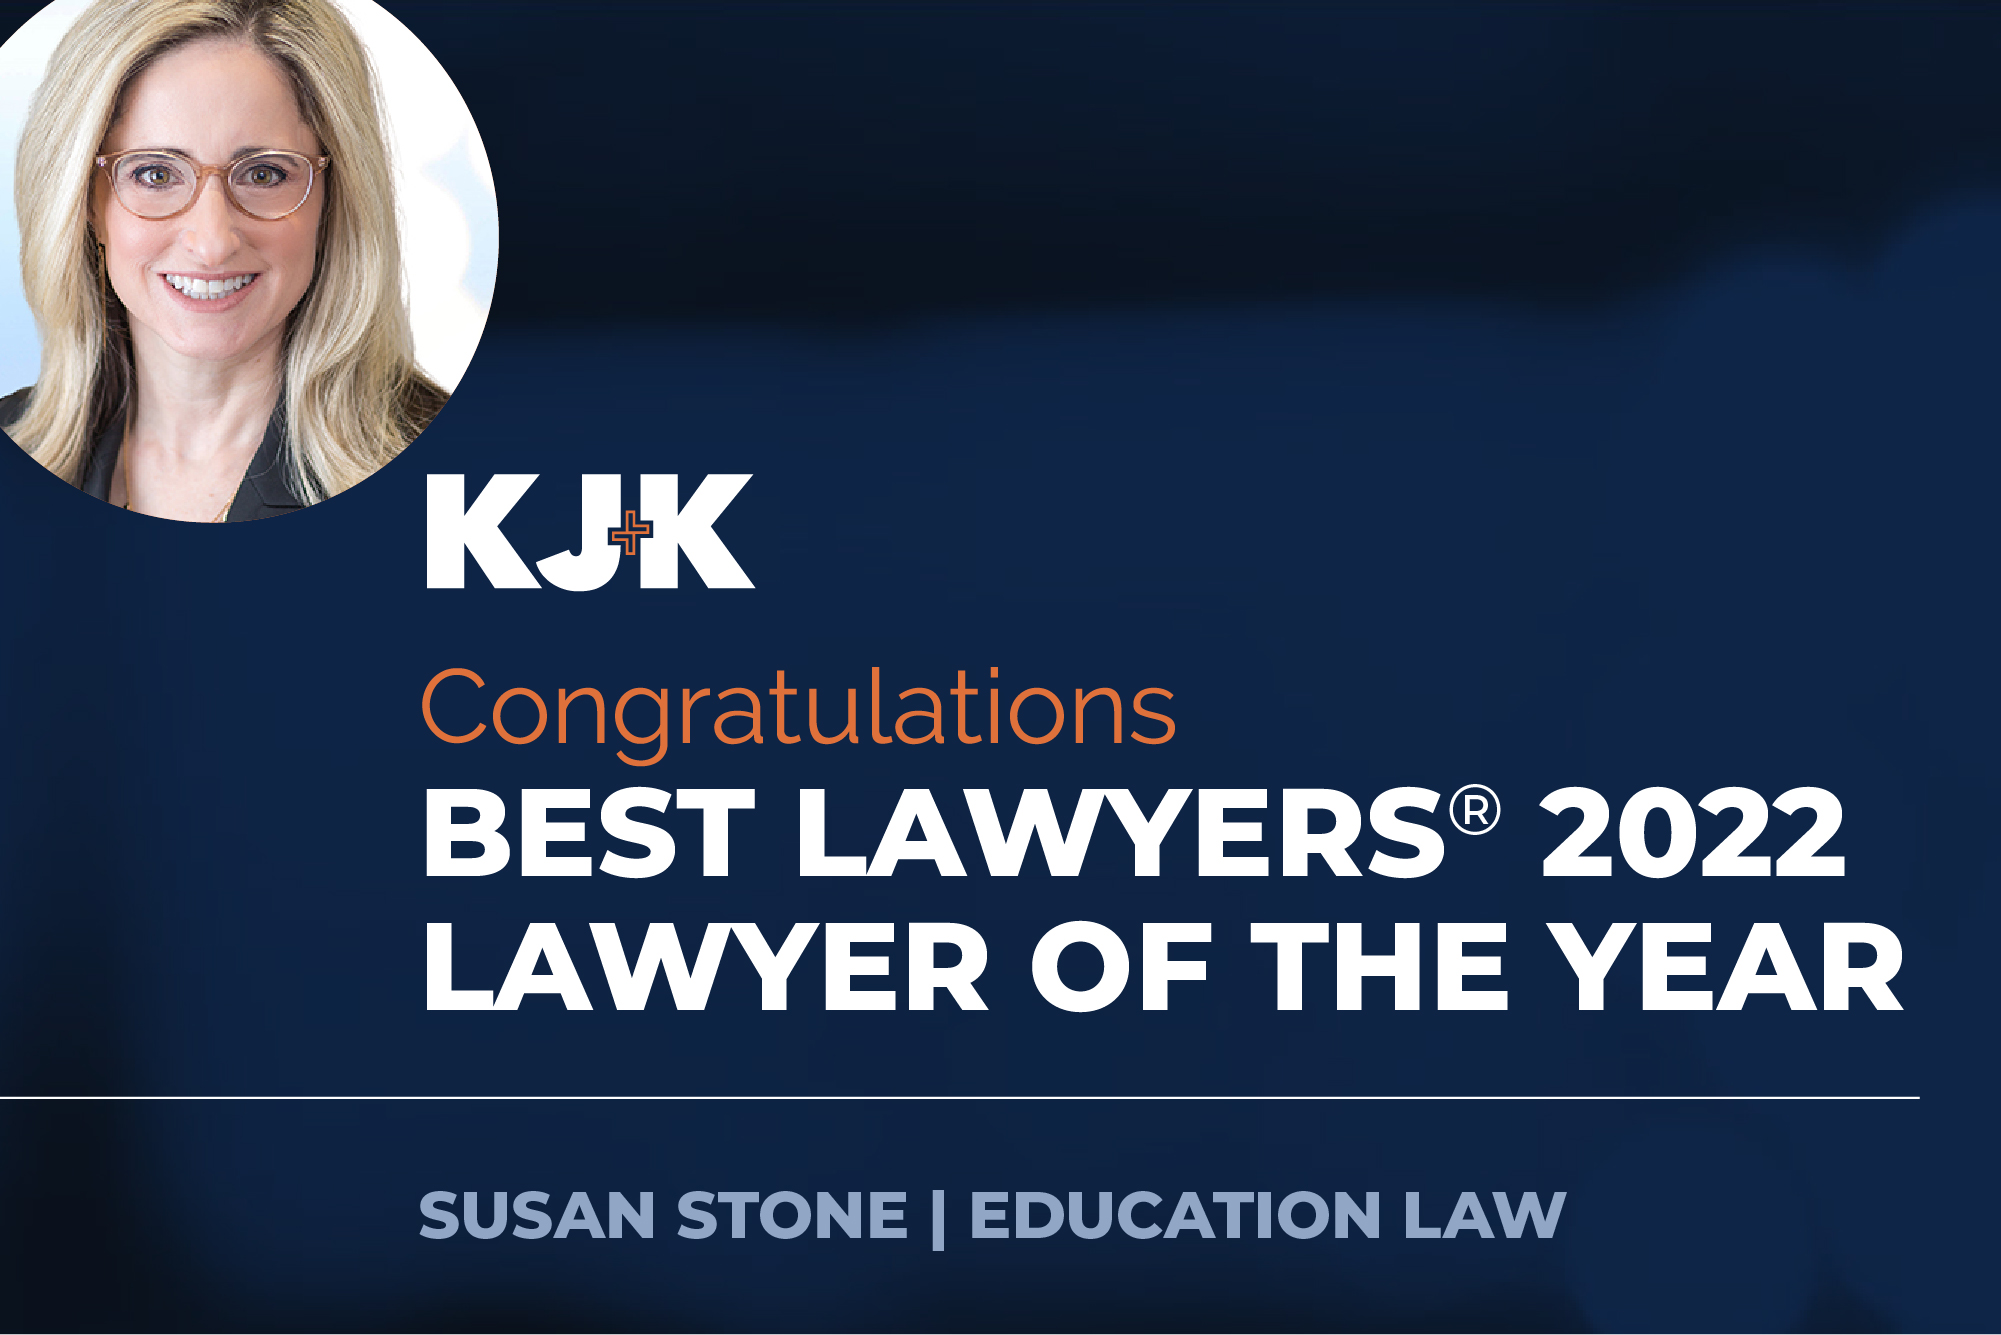 Susan Stone lawyer of the year education 2022